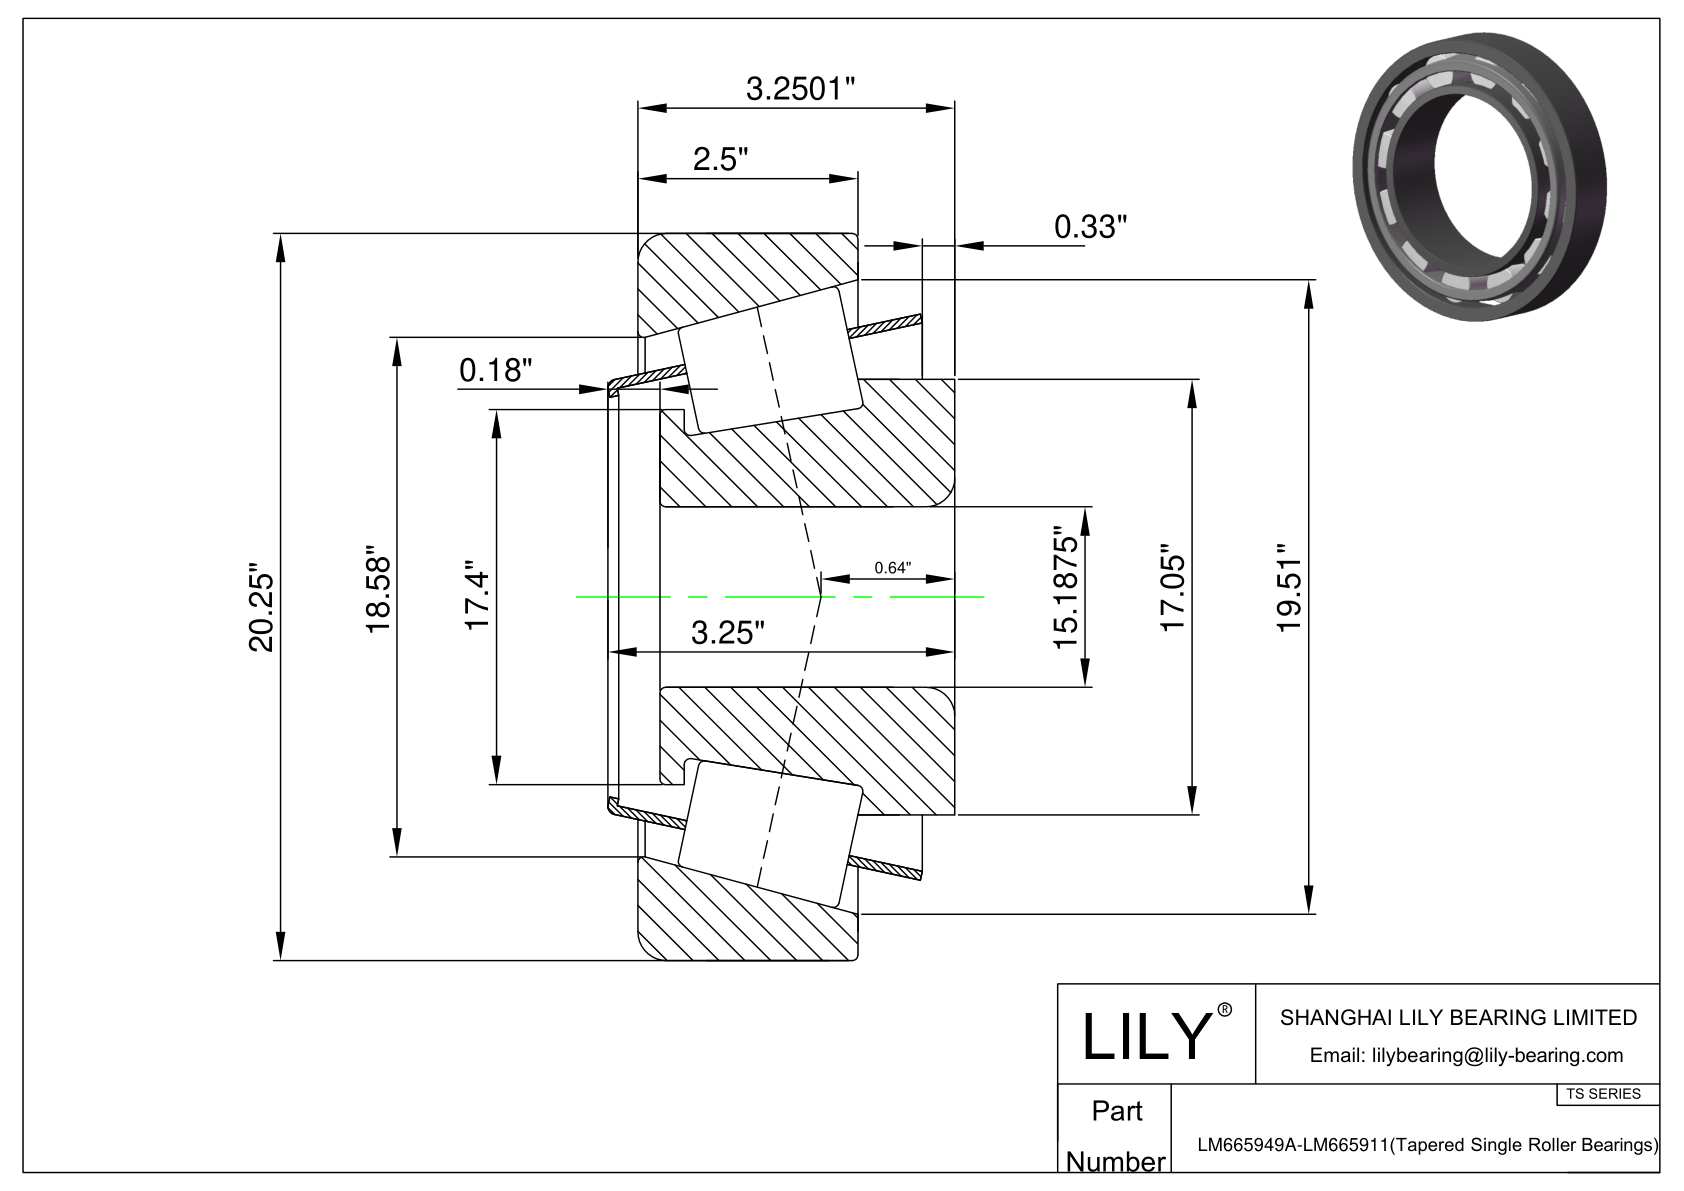 LM665949A-LM665911 TS (Tapered Single Roller Bearings) (Imperial) cad drawing